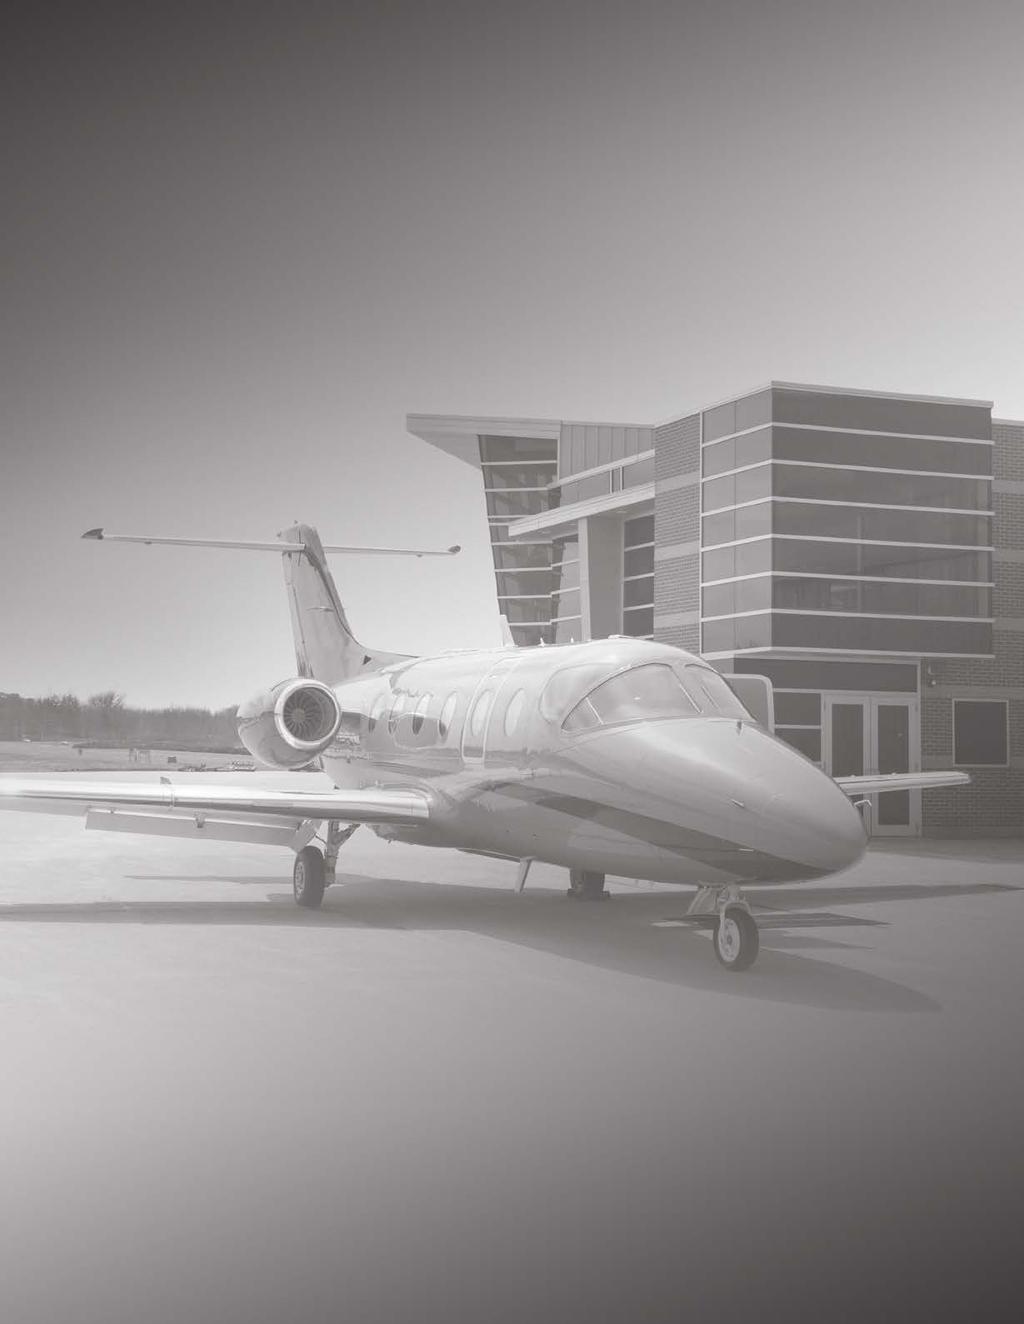 Constant Aviation is a one-stop shop for all your aircraft needs. Our nationwide network of facilities including Cleveland, Orlando, Mesa and Las Vegas total over 410,000 sq. ft.